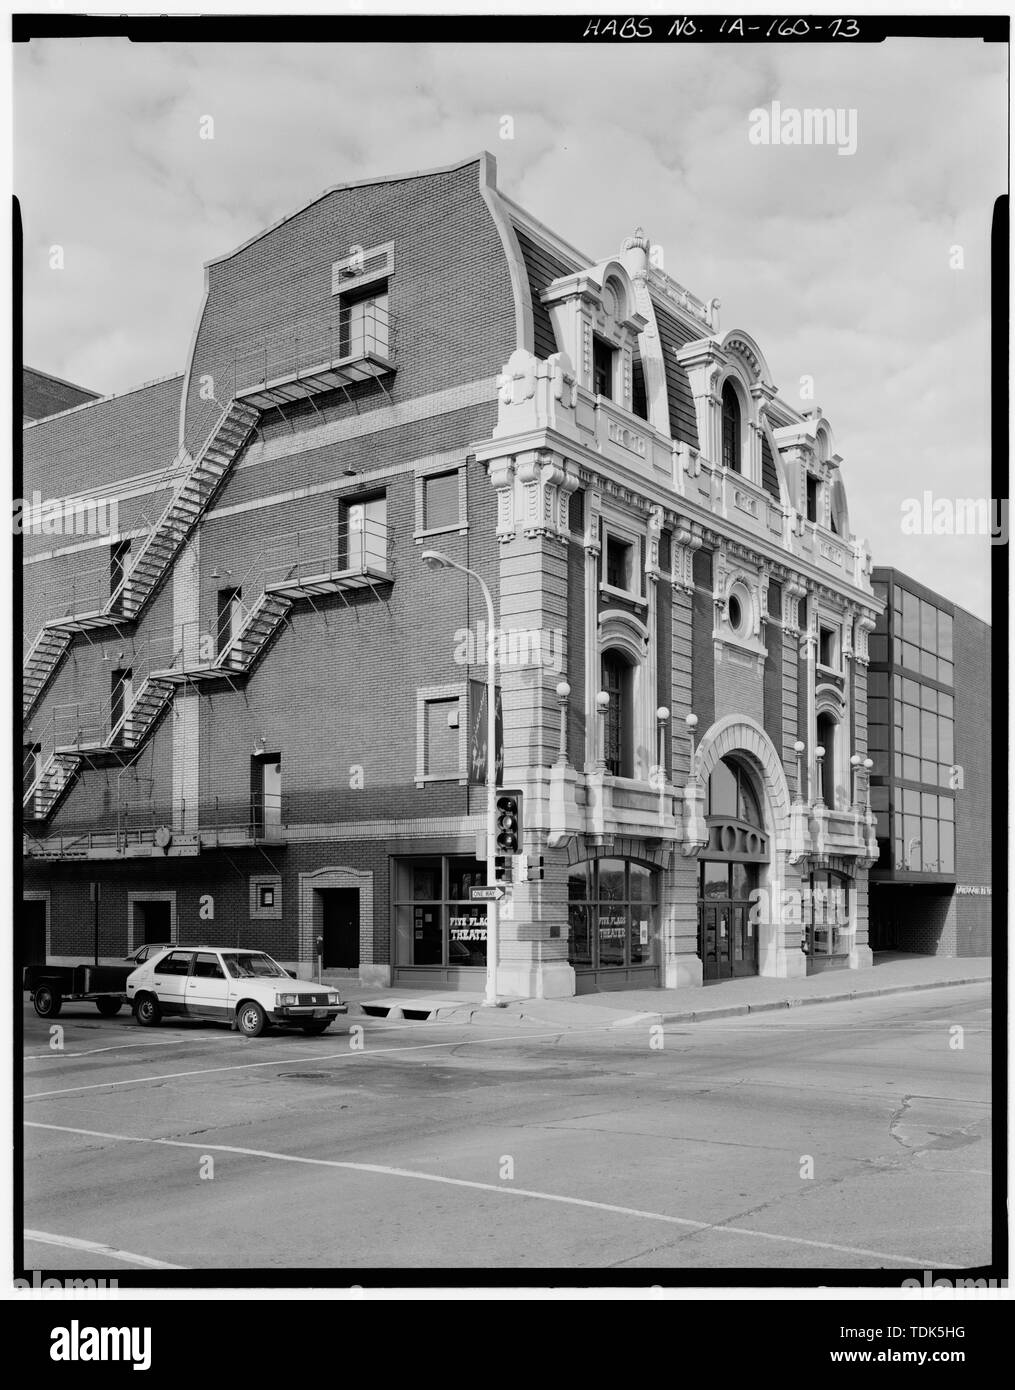 ORPHEUM THEATER ON 400 BLOCK OF MAIN STREET. VIEW TO NORTHWEST. - Dubuque Commercial and Industrial Buildings, Dubuque, Dubuque County, IA; The Orpheum Theater building — in Dubuque, Iowa.  Present day Five Flags Center music and entertainment venue. Image (1988): Dubuque Commercial and Industrial Buildings documentation project, by the HABS—Historic American Buildings Survey of Iowa. Stock Photo